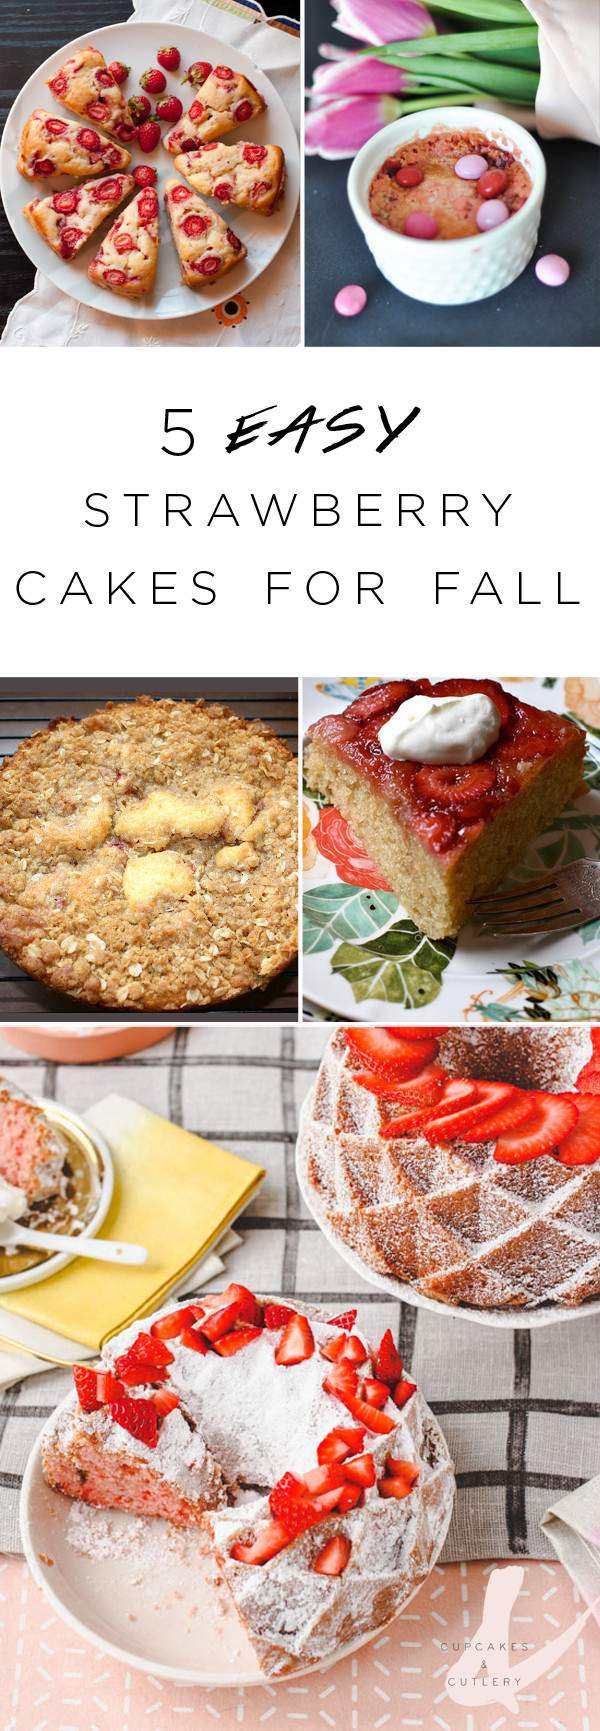 Easy Fall Desserts For A Crowd
 5 Easy Strawberry Cake Recipes for Fall